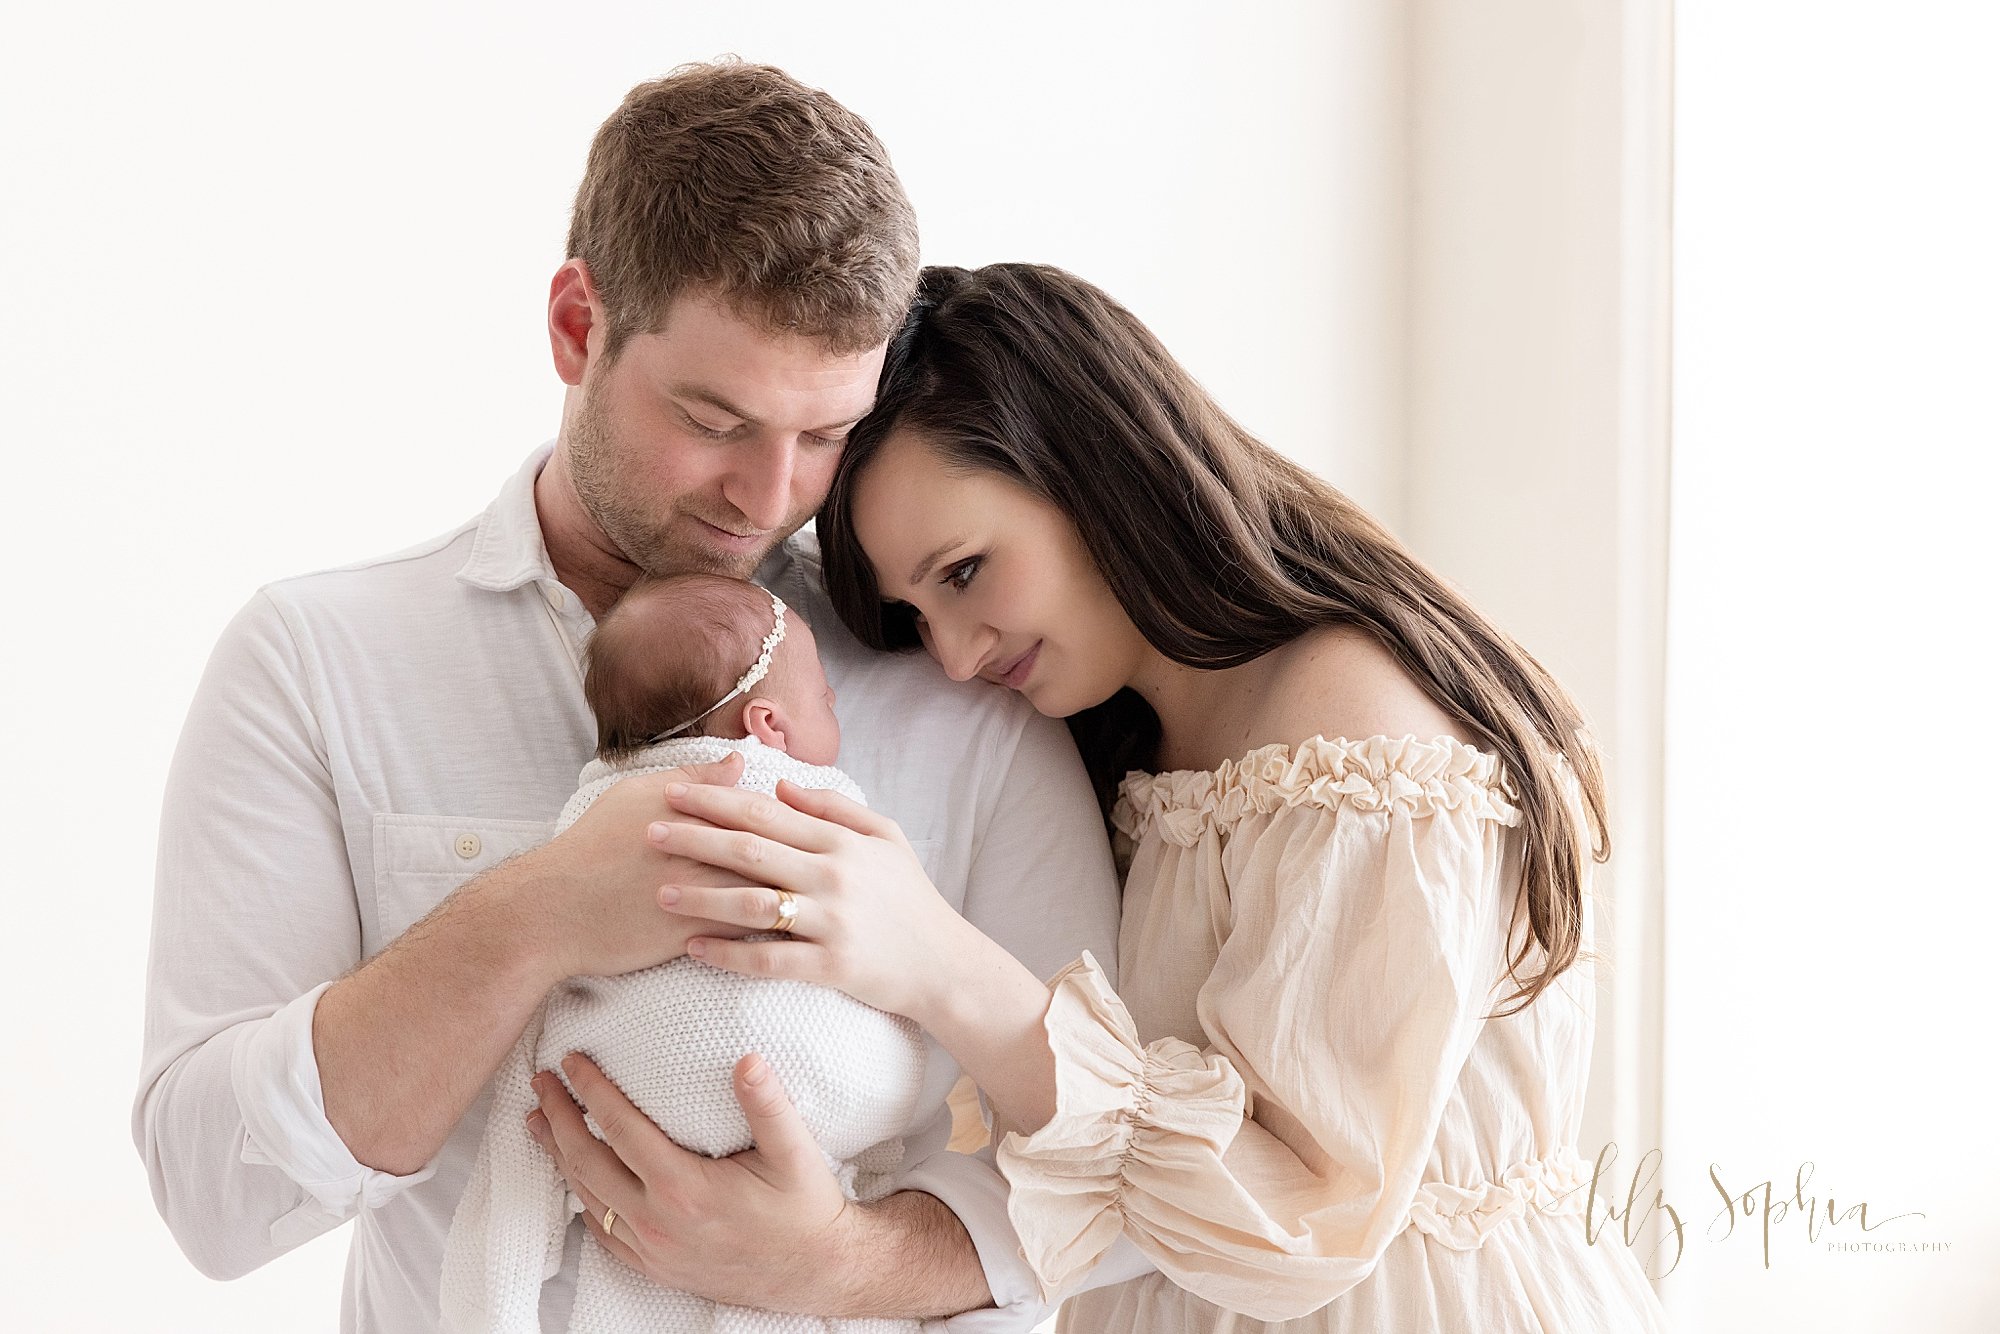  Newborn family portrait as dad holds his newborn baby girl against her chest and mom places her head on her husband’s left shoulder and the two of them place their hands on their daughter’s back as the stand next to a window streaming natural light 